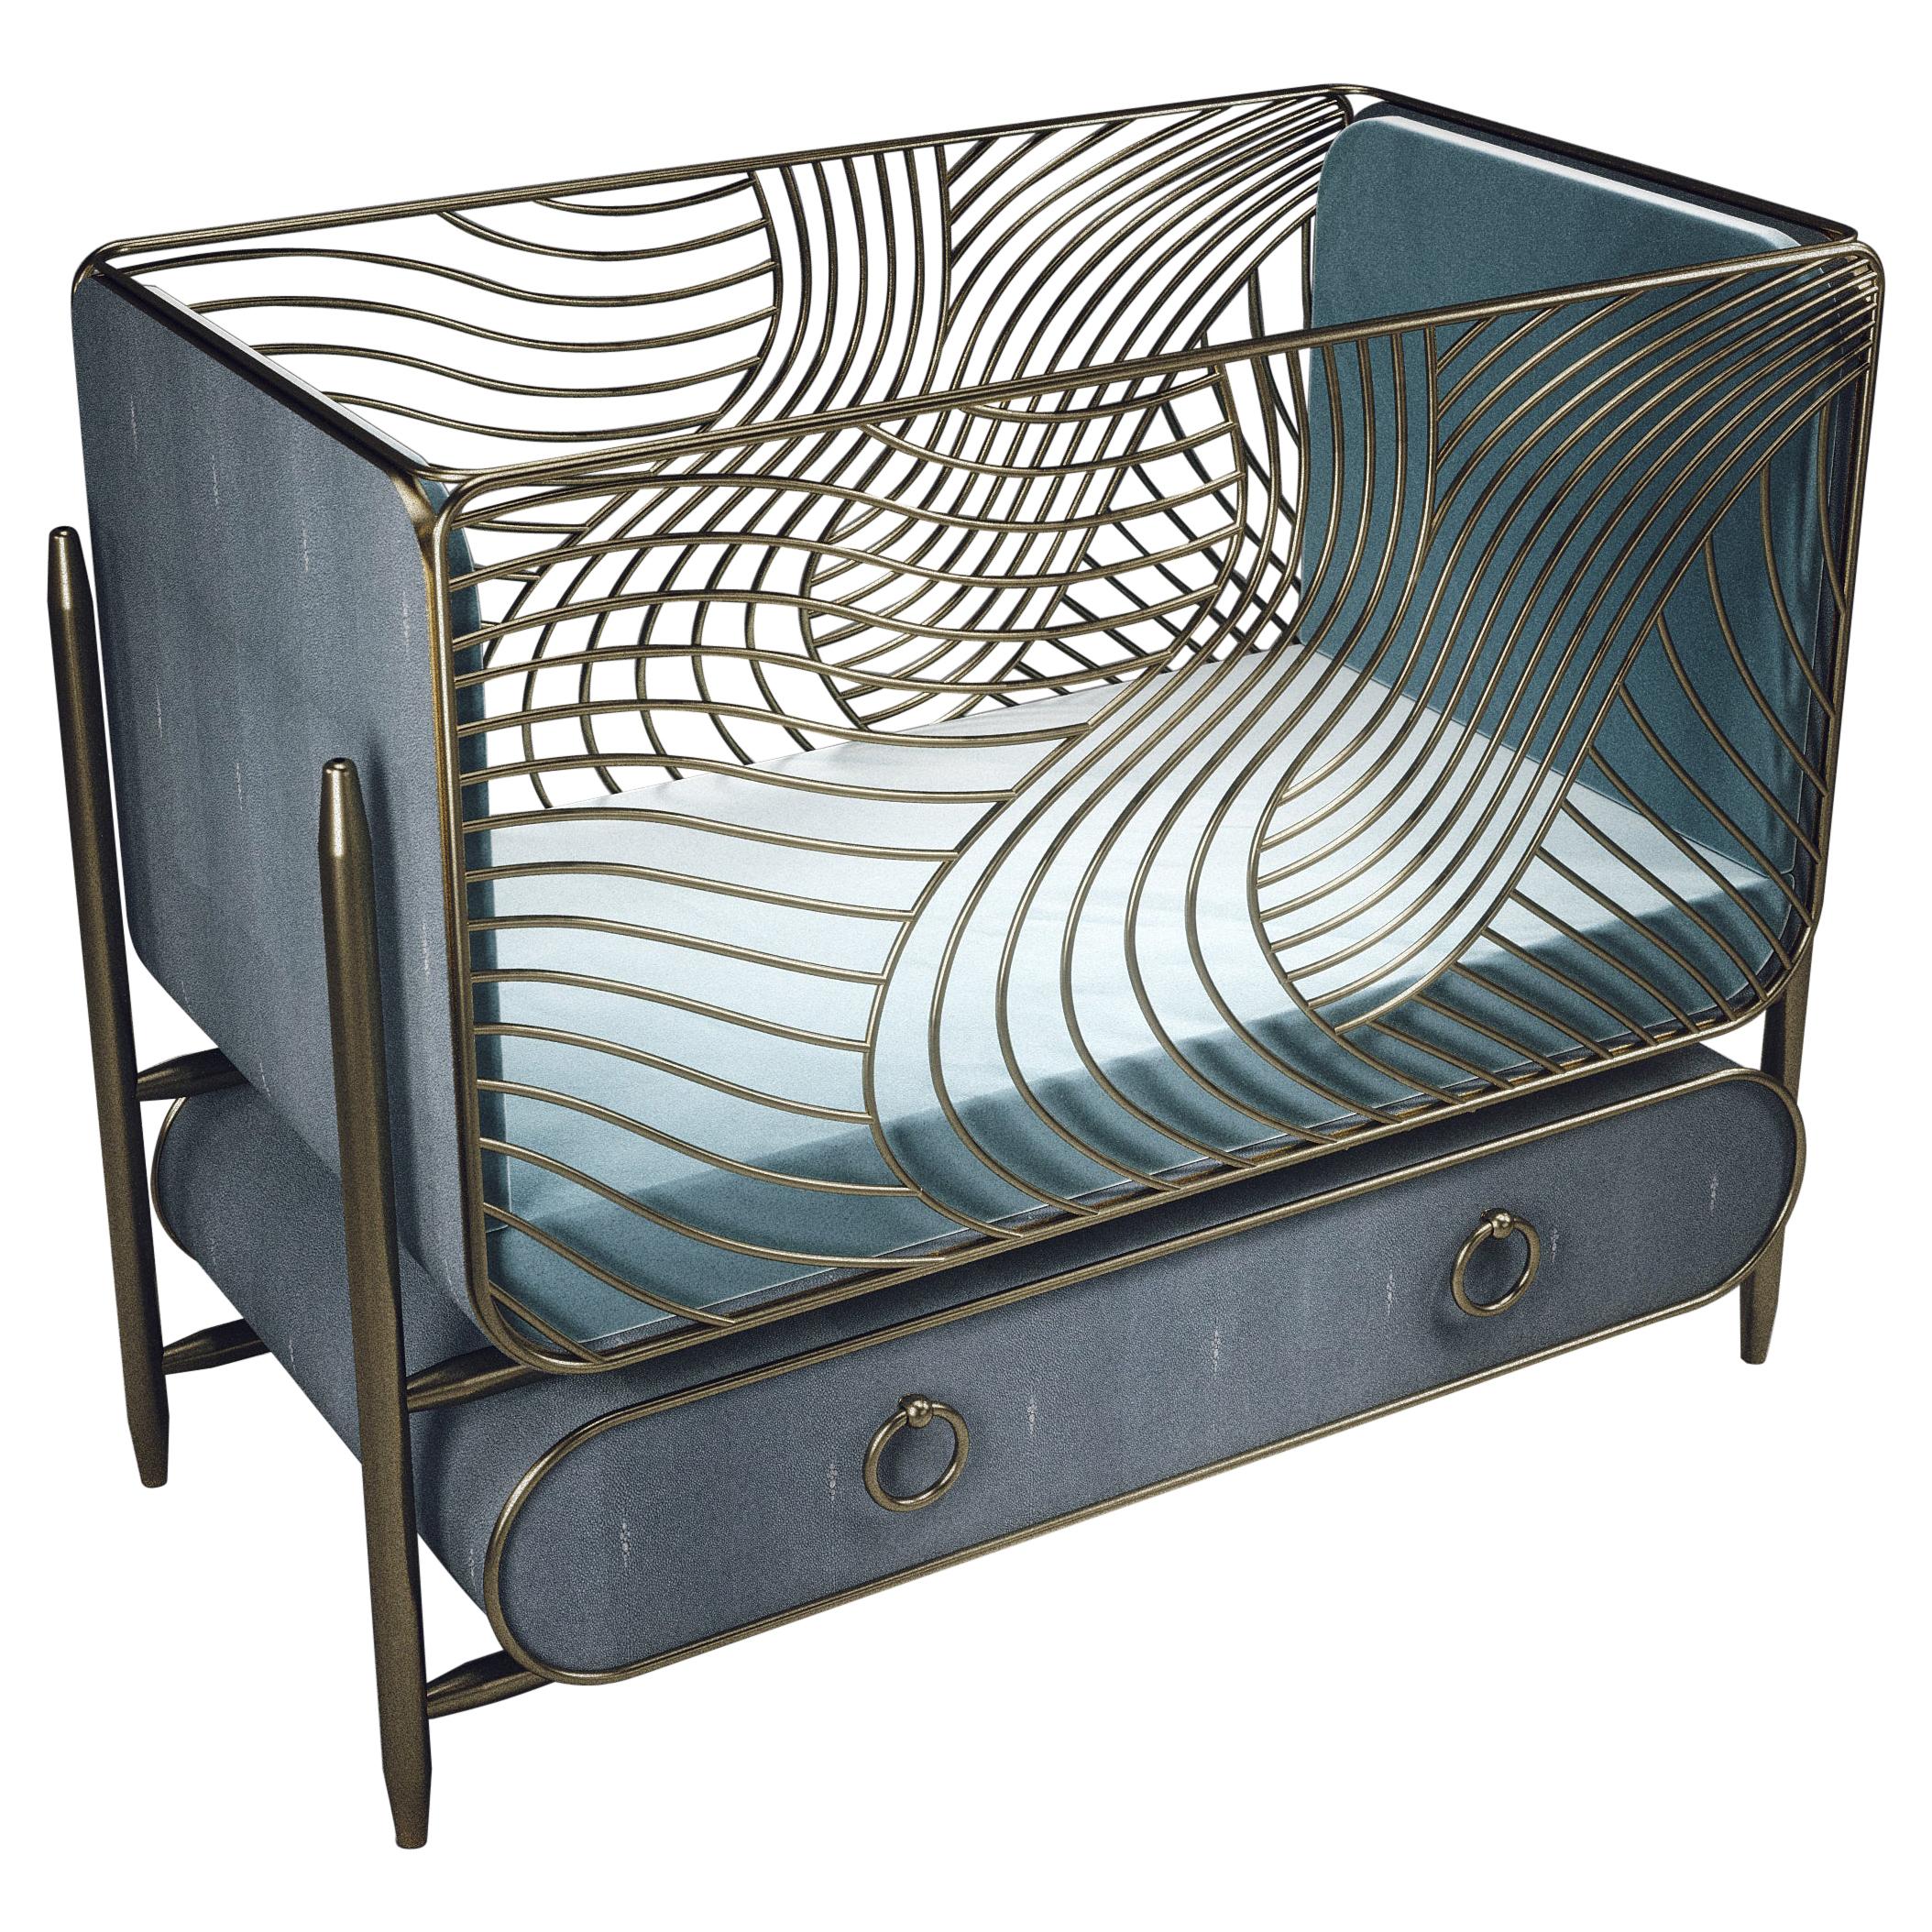 Shagreen Baby Crib with Brass Accents by Kifu Paris